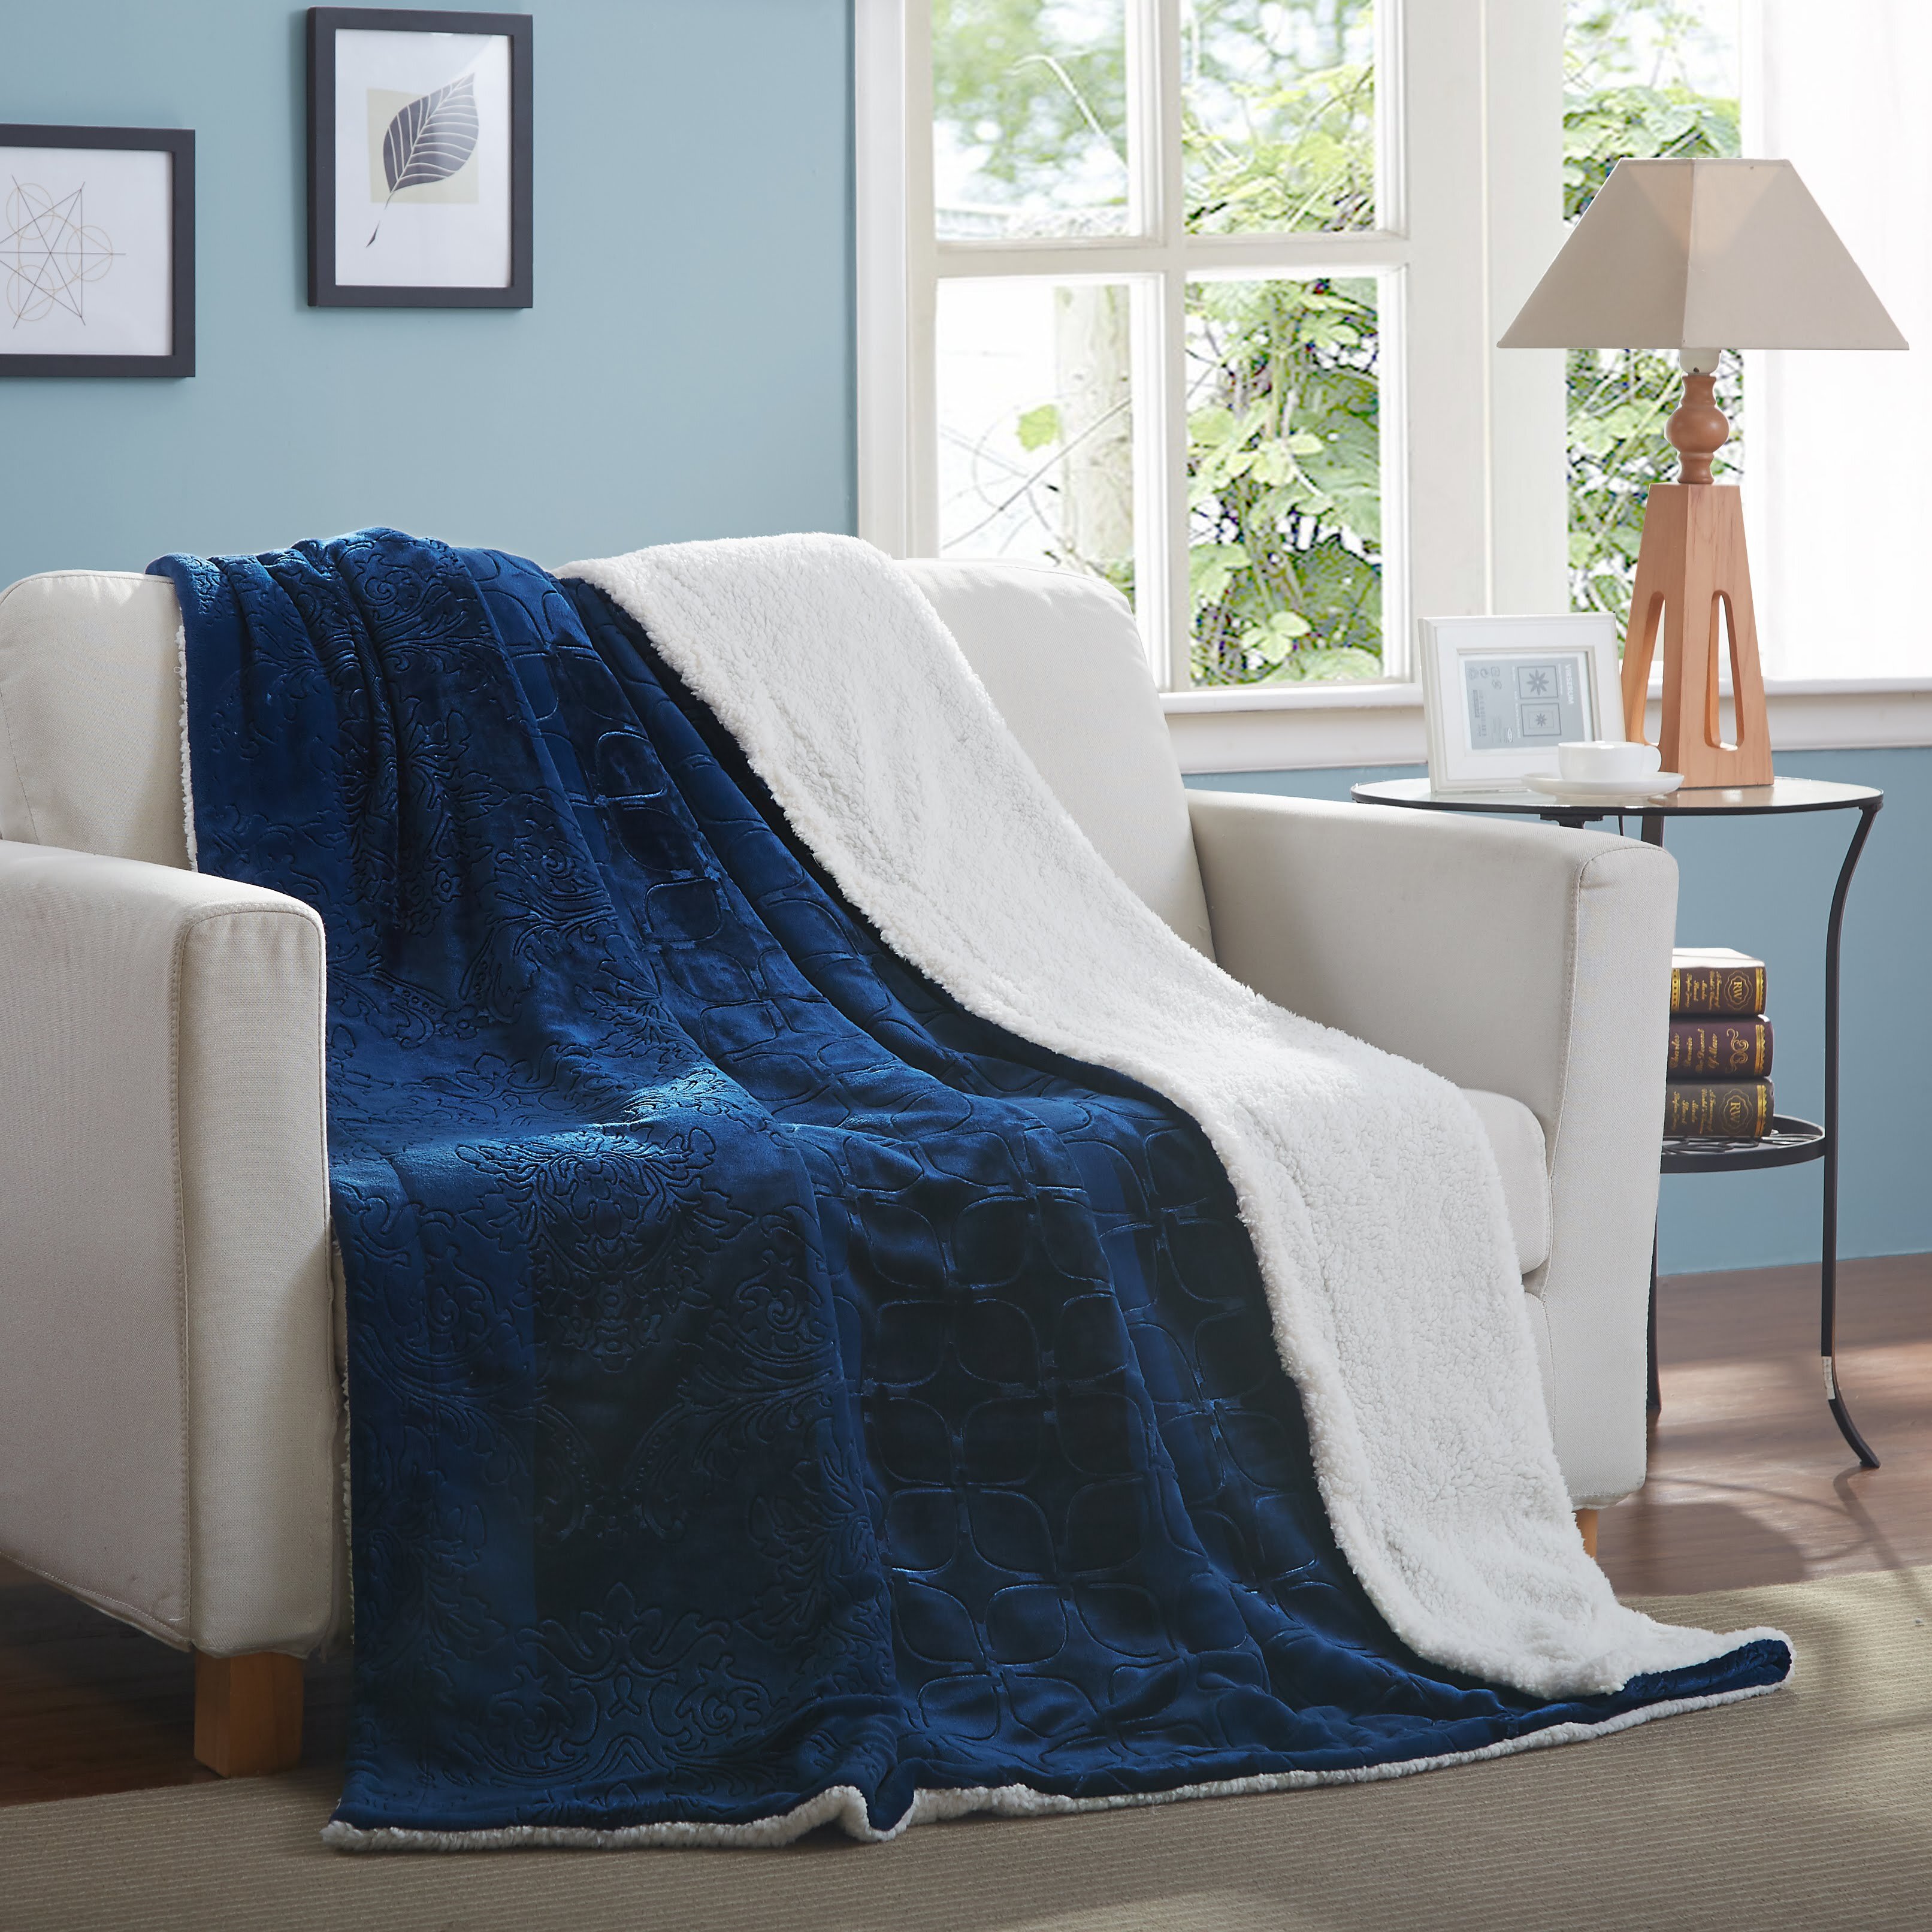 Living Room Sofa 50x 80 in Super Soft and Warm ZOE STORE Solid Light Blue Plush Fluffy Fleece Blankets Seasons Pure Color Sherpa Fleece Throw Blanket for Bedroom 